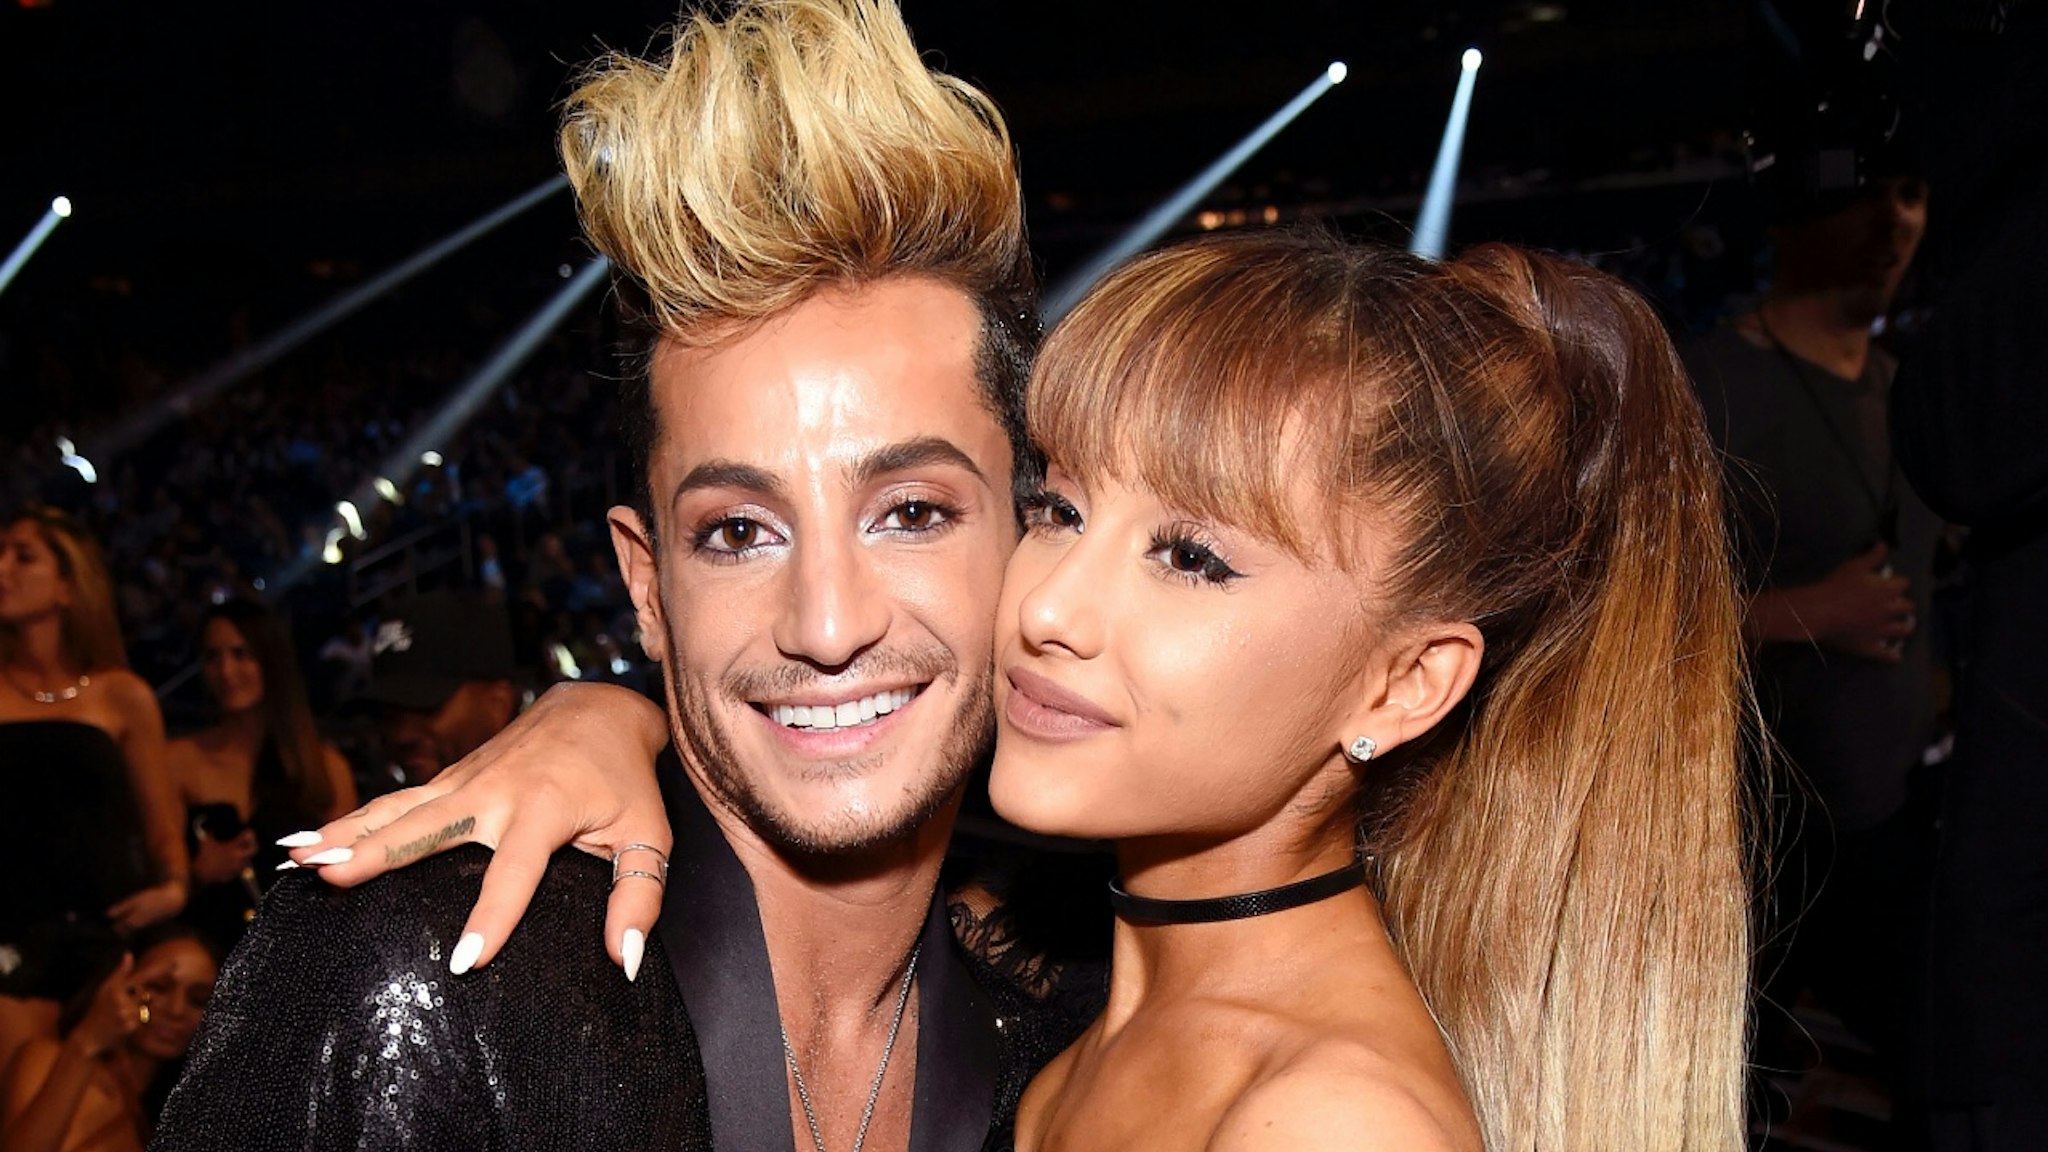 Frankie J. Grande (L) and Ariana Grande pose during the 2016 MTV Video Music Awards at Madison Square Garden on August 28, 2016 in New York City.